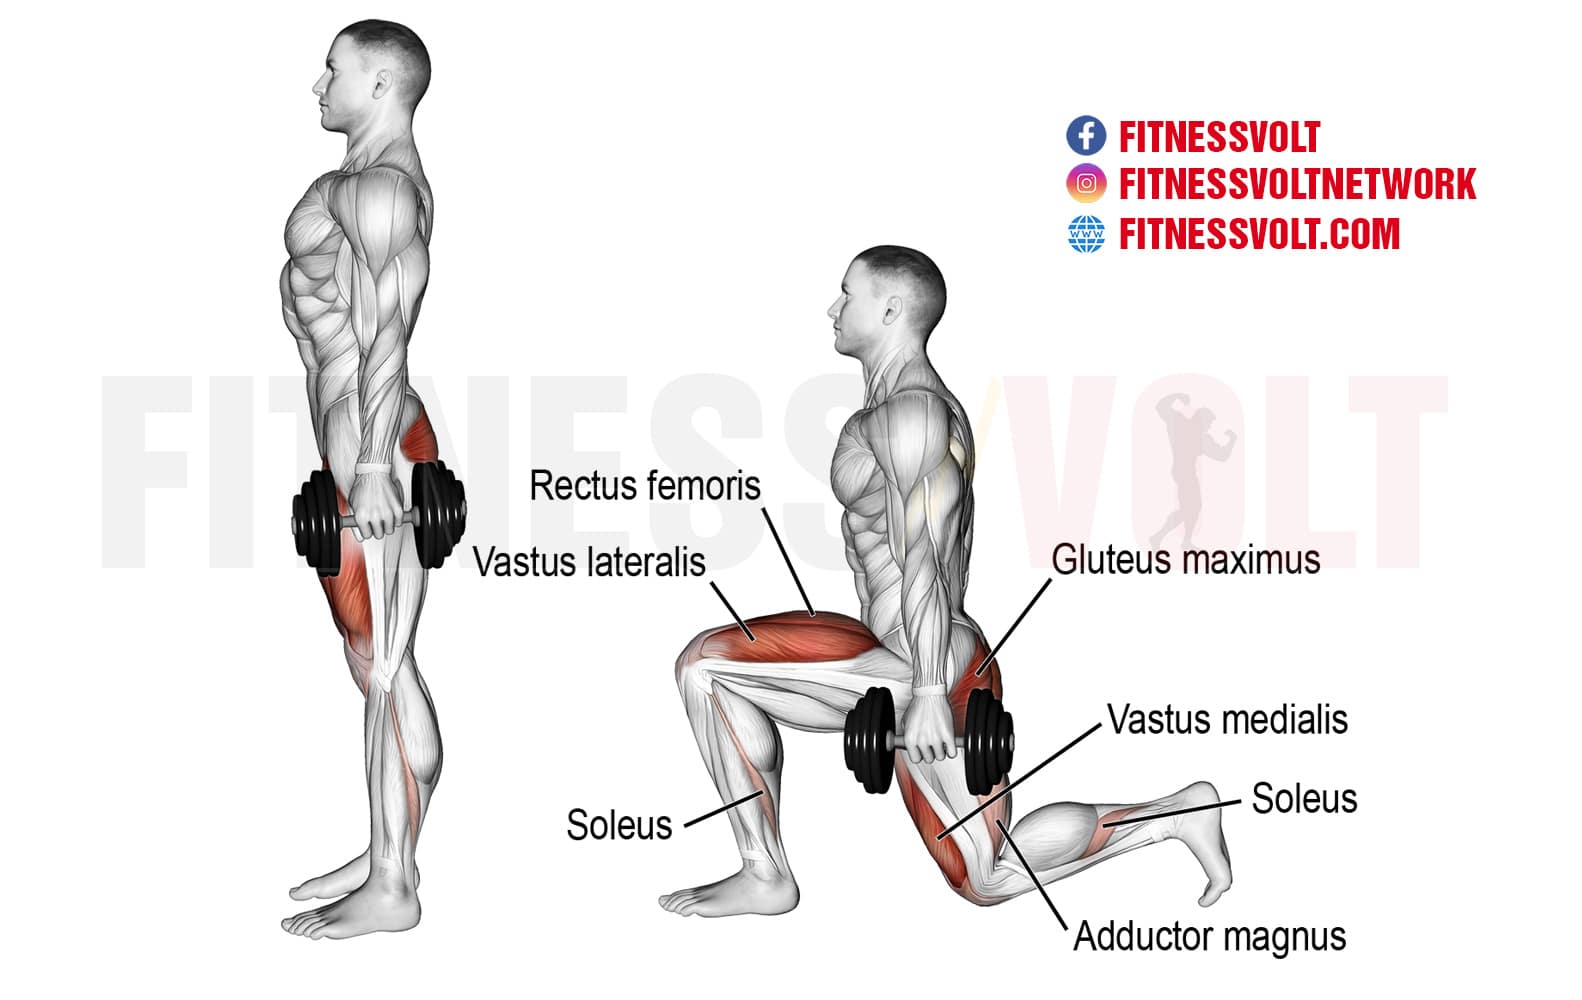 lunge exercise muscles worked